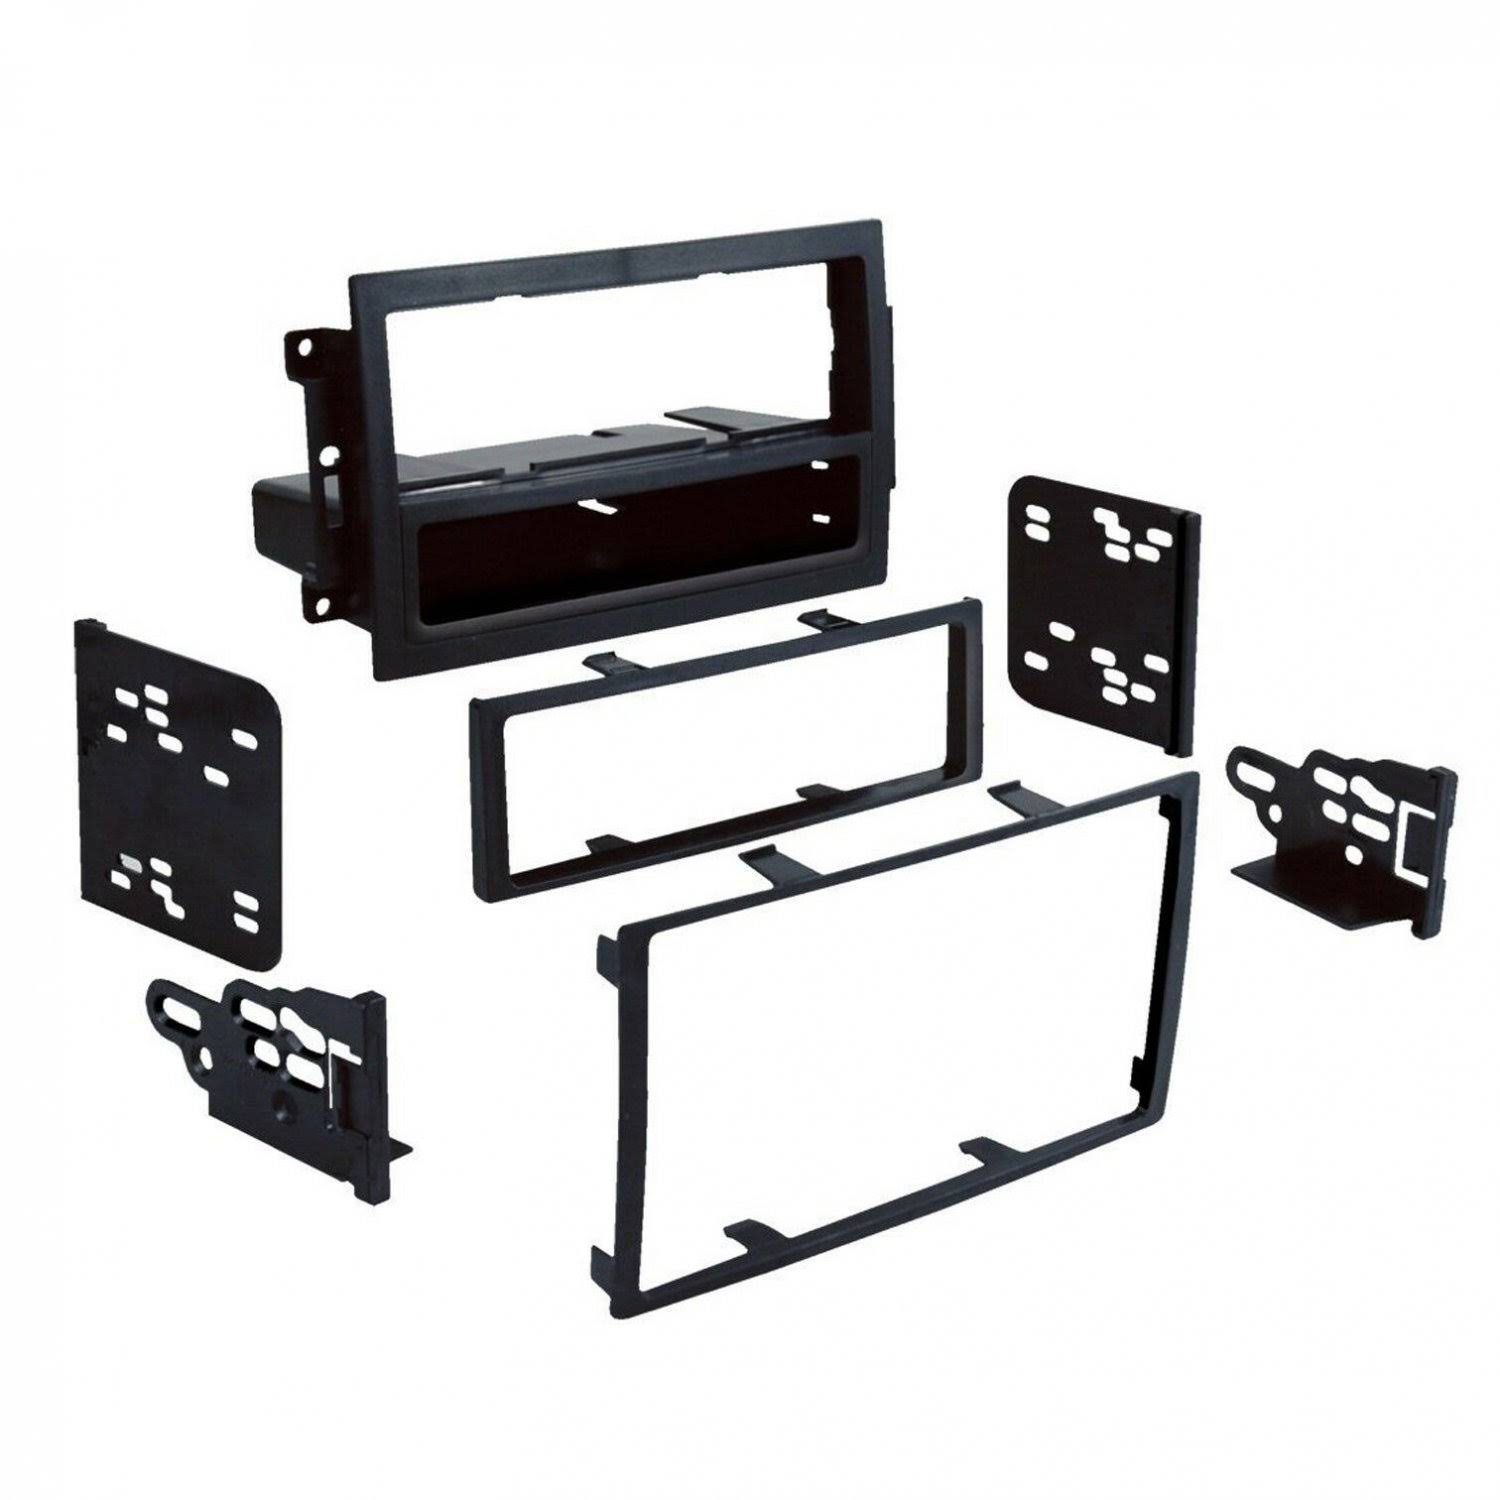 Metra 2007-2008 Chrysler Dodge And Jeep Vehicles Installation Kit